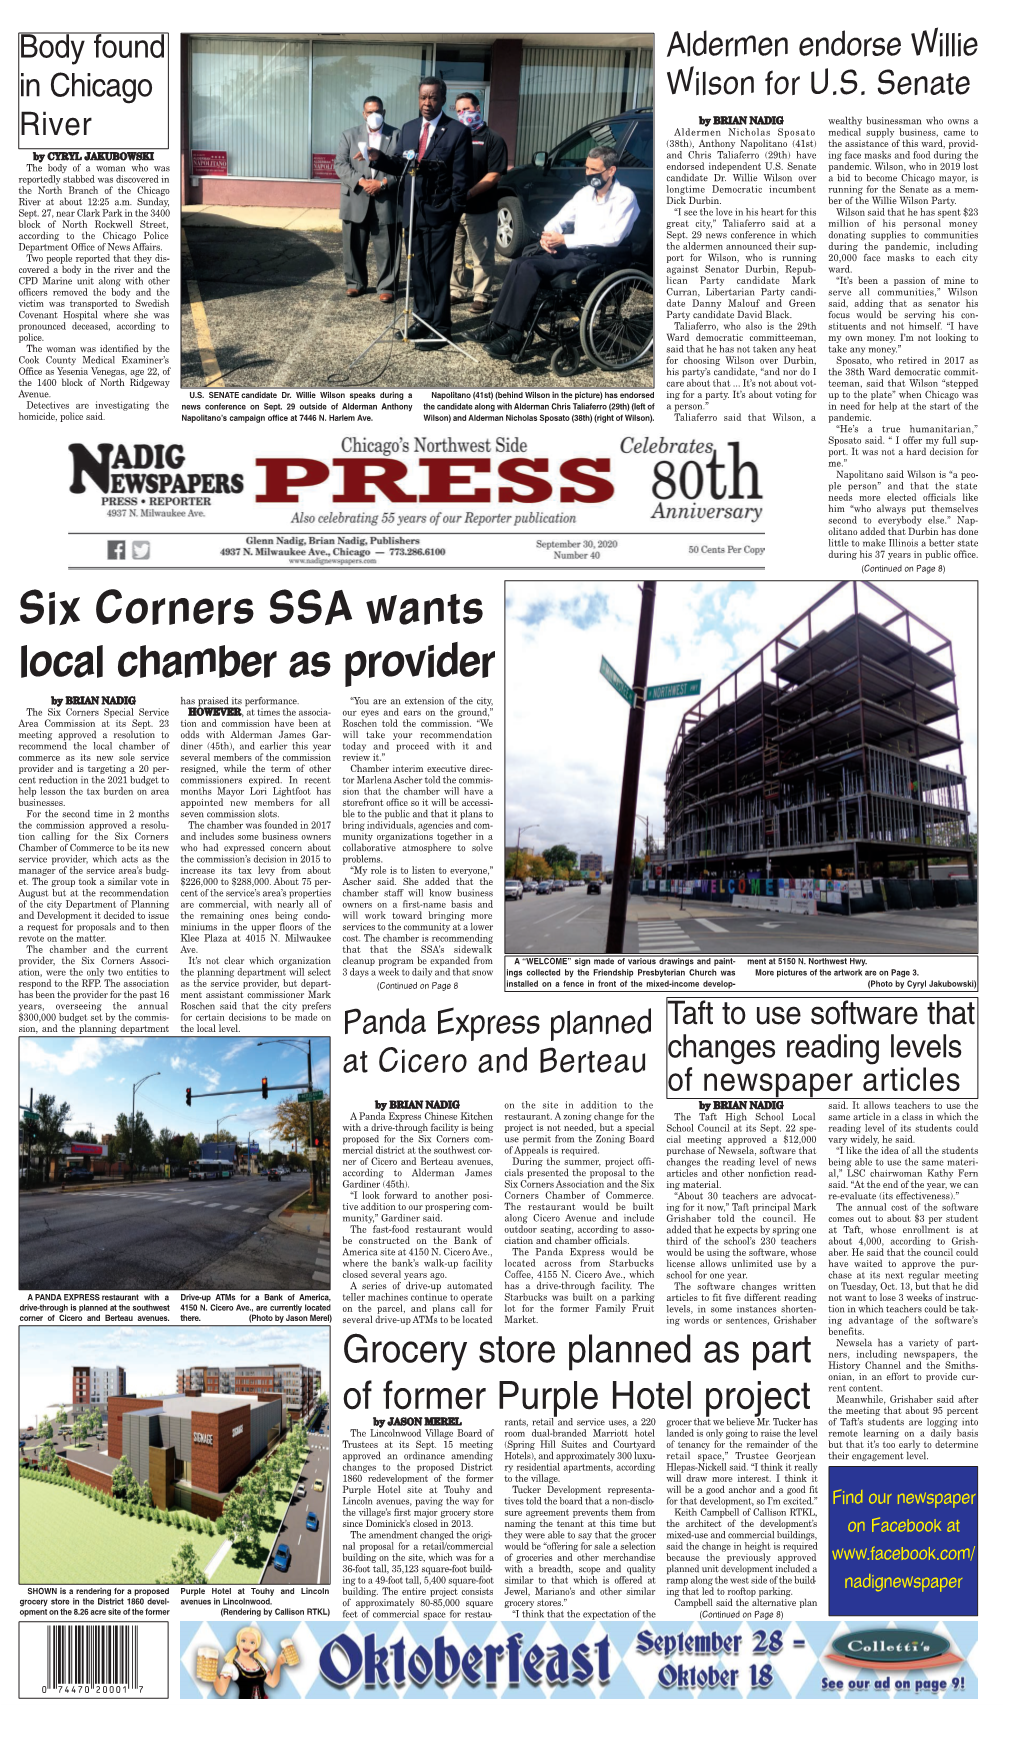 Six Corners SSA Wants Local Chamber As Provider by BRIAN NADIG Has Praised Its Performance